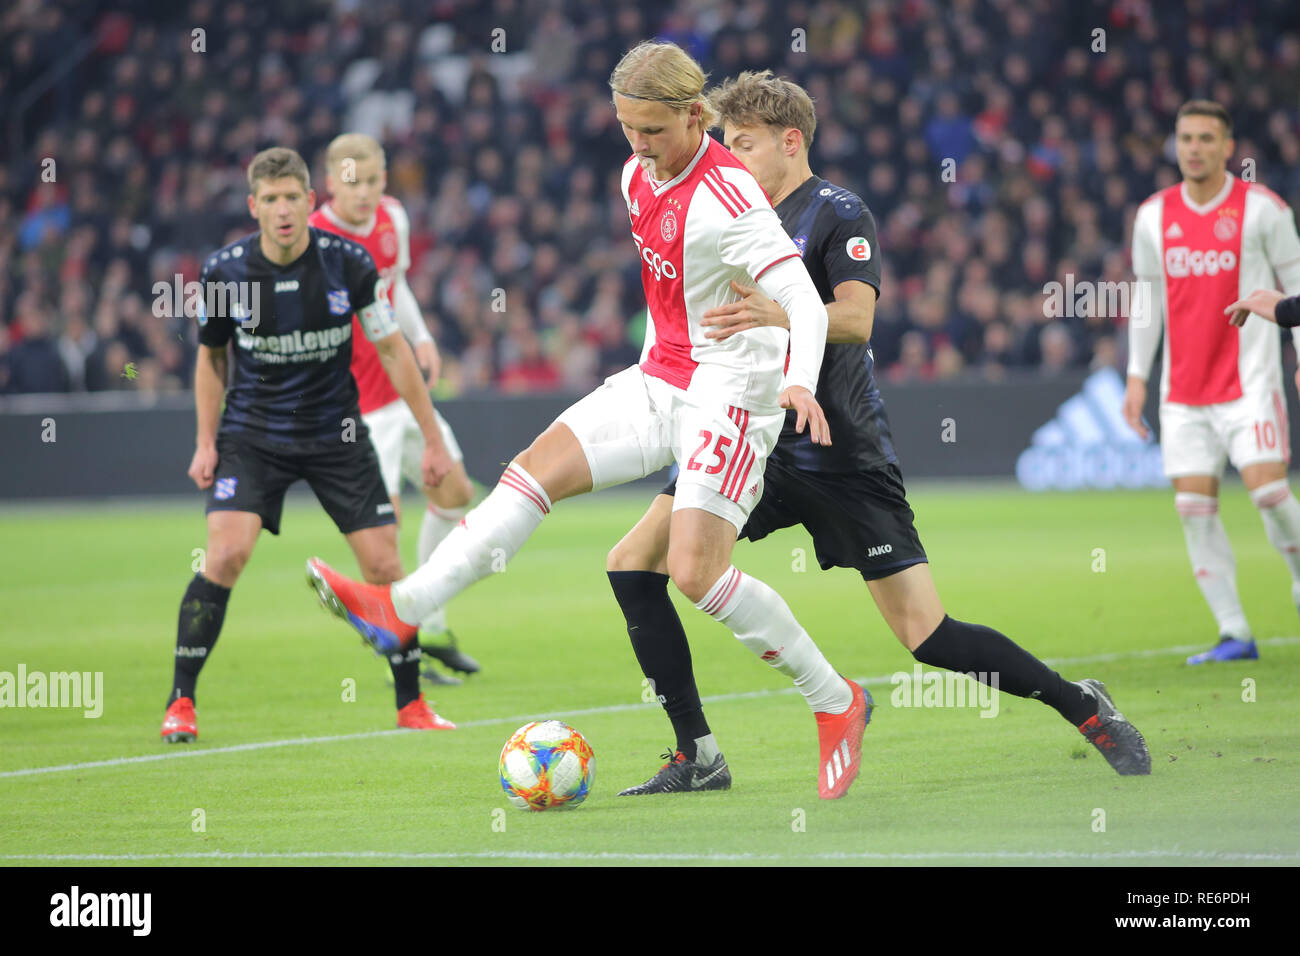 Amsterdam, Netherlands. 20th January 2019. Ajax attacker Kasper Dolberg kicks the ball during the game against Heerenveen for a match in the Dutch first division. Amsterdam, Netherlands, January 20, 2019. Credit: Federico Guerra Maranesi/Alamy Live News Stock Photo